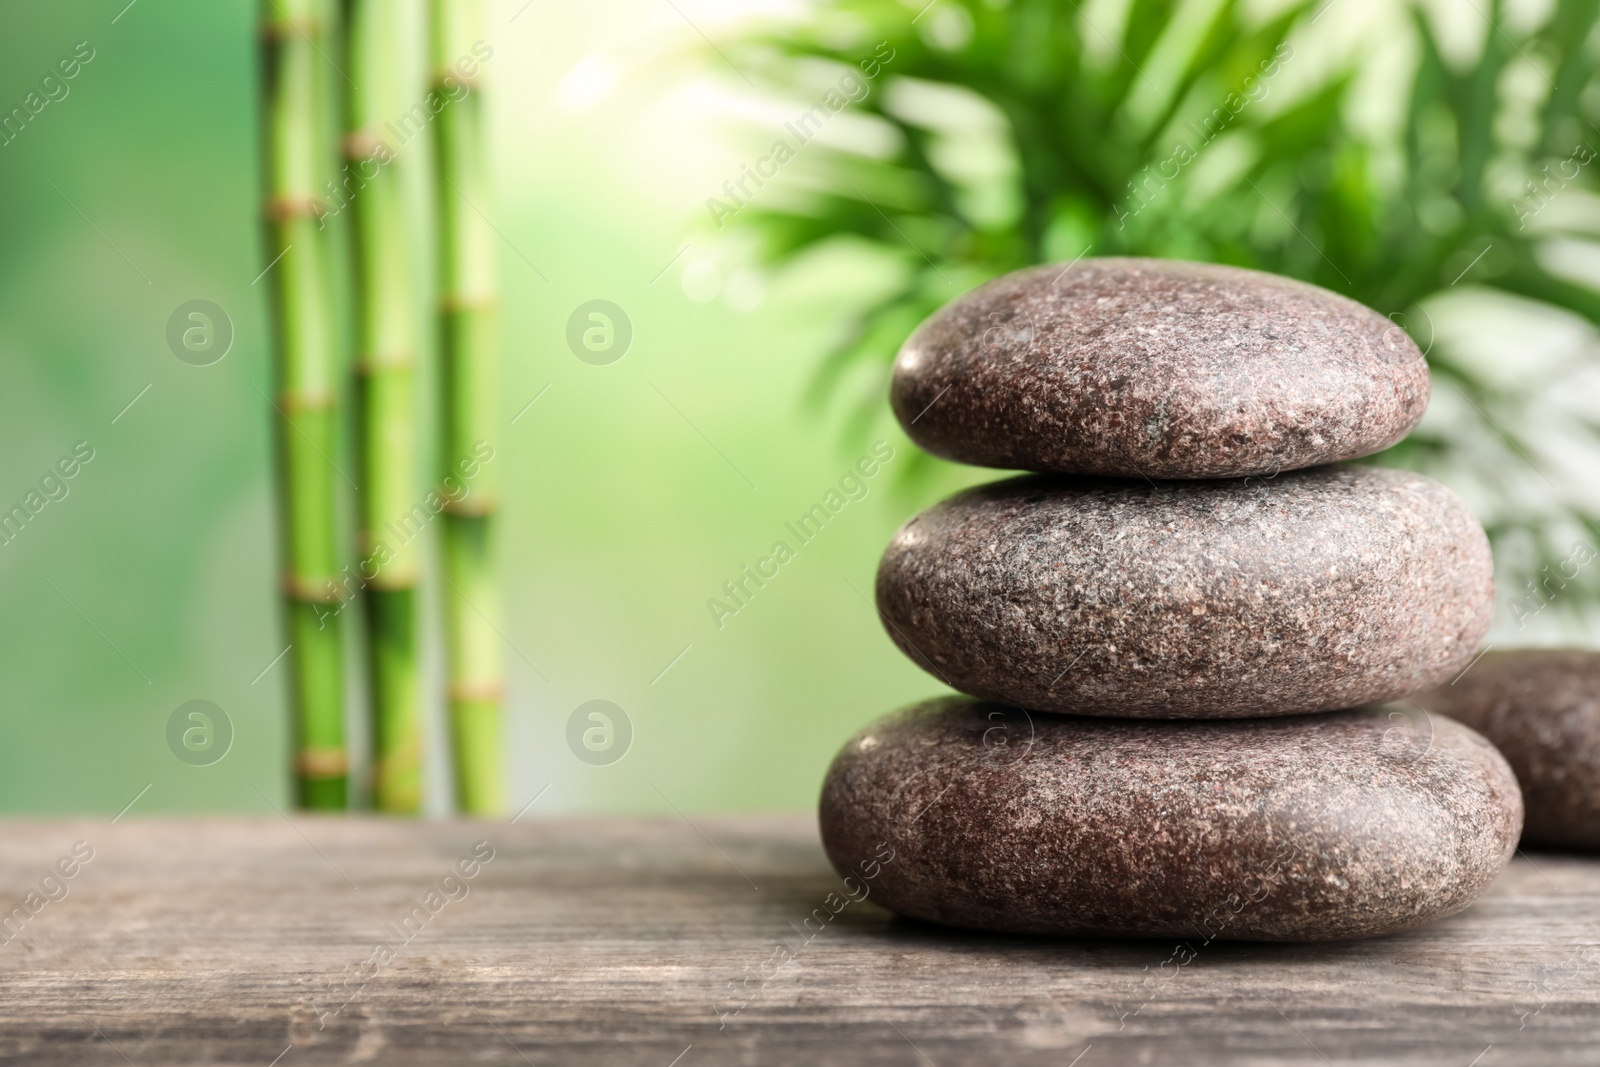 Photo of Stacked spa stones on wooden table against bamboo stems and green leaves. Space for text